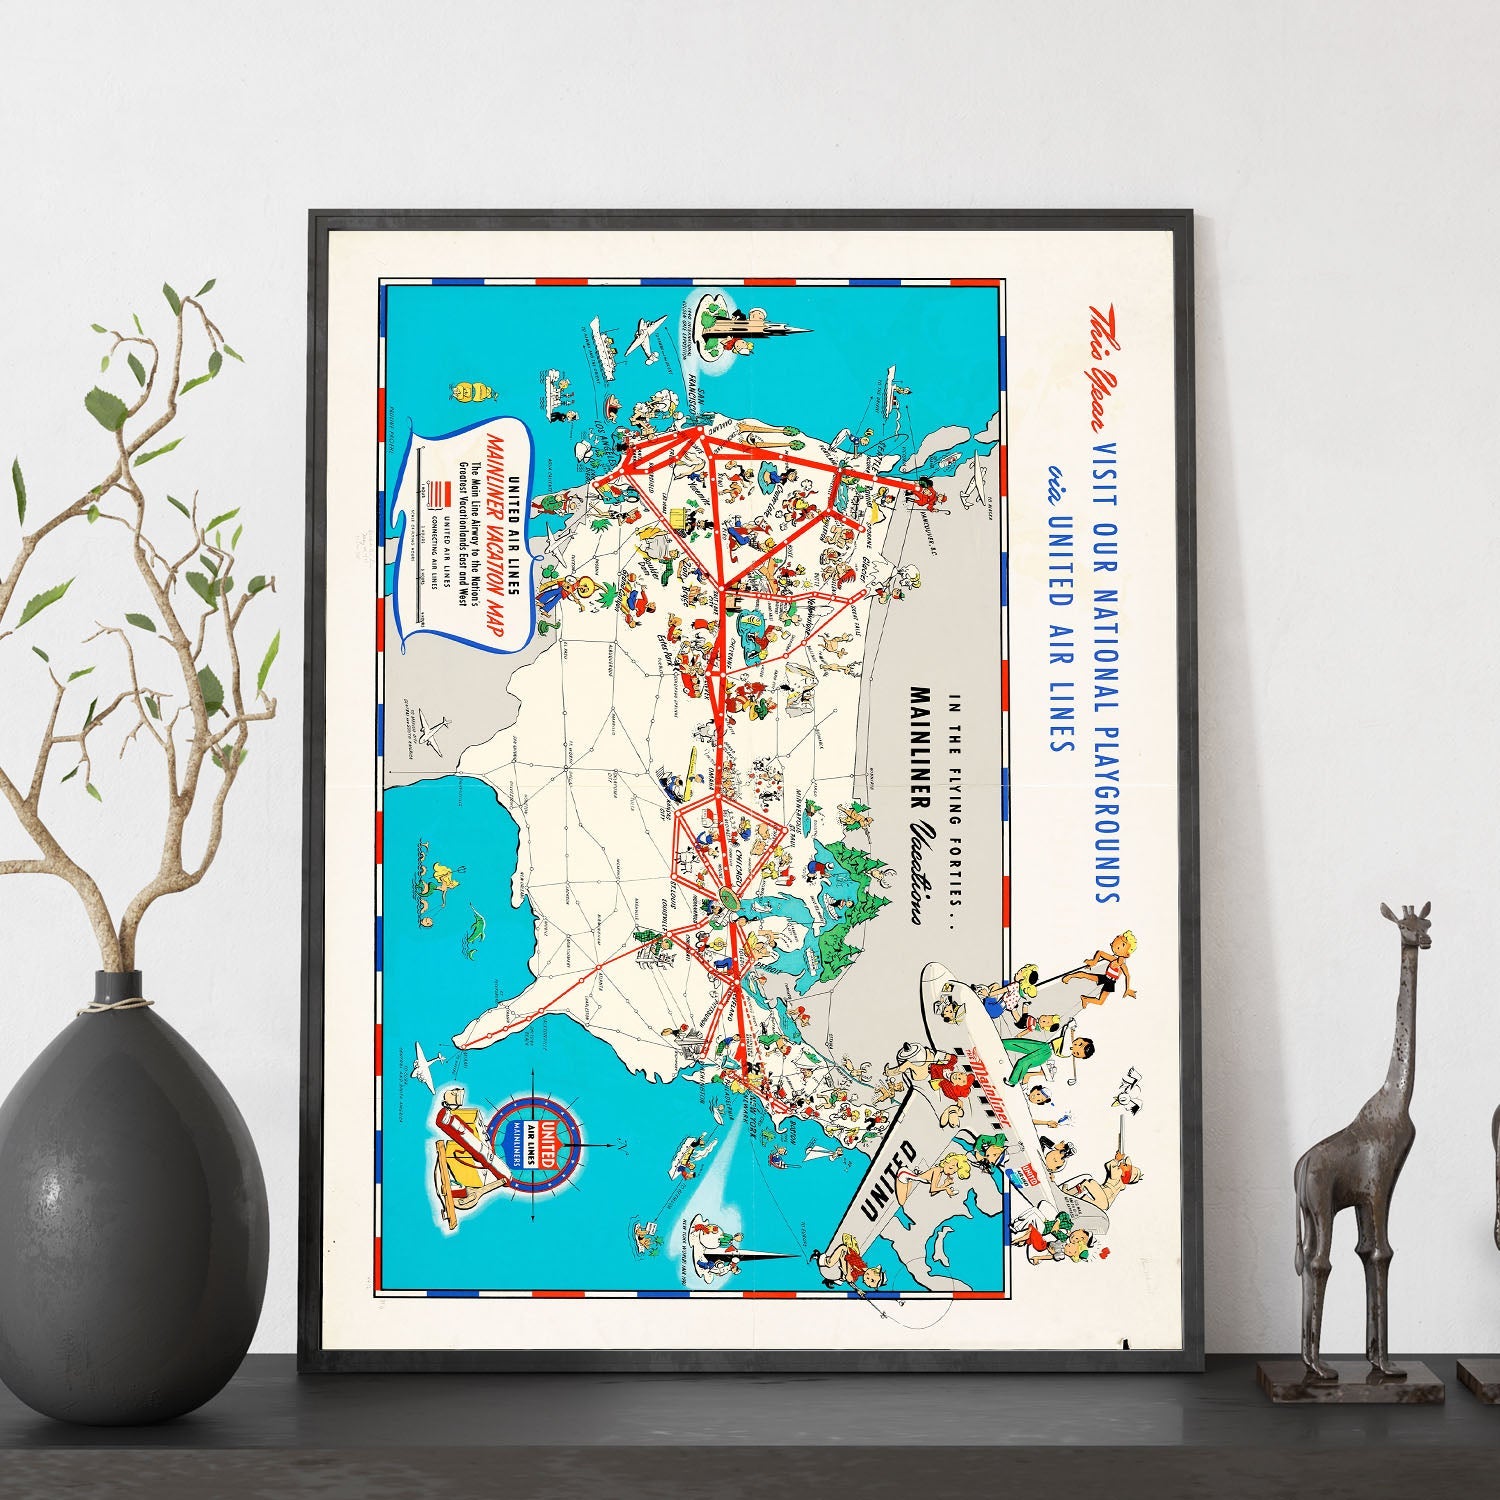 United_Air_Lines_mainliner_vacation_map_-_the_main_line_airway_to_the_nations_greatesst_vacationlands_east_and_west-Artwork-Nacnic-Nacnic Estudio SL